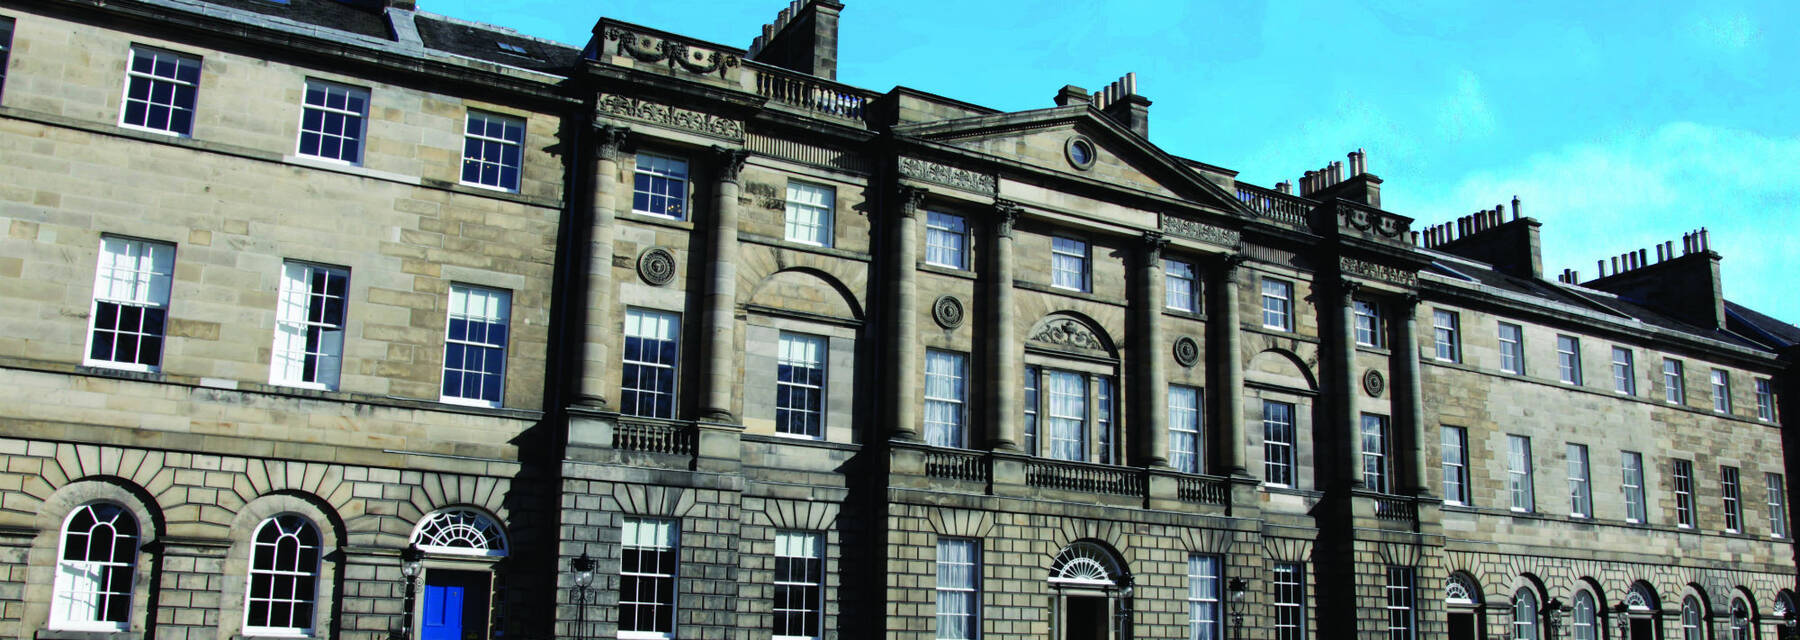 A view of the frontage of the Georgian House and neighbouring Robert Adam-designed buildings, in Charlotte Square. The Georgian House has a blue front door in this image, mirroring the blue sky overhead.